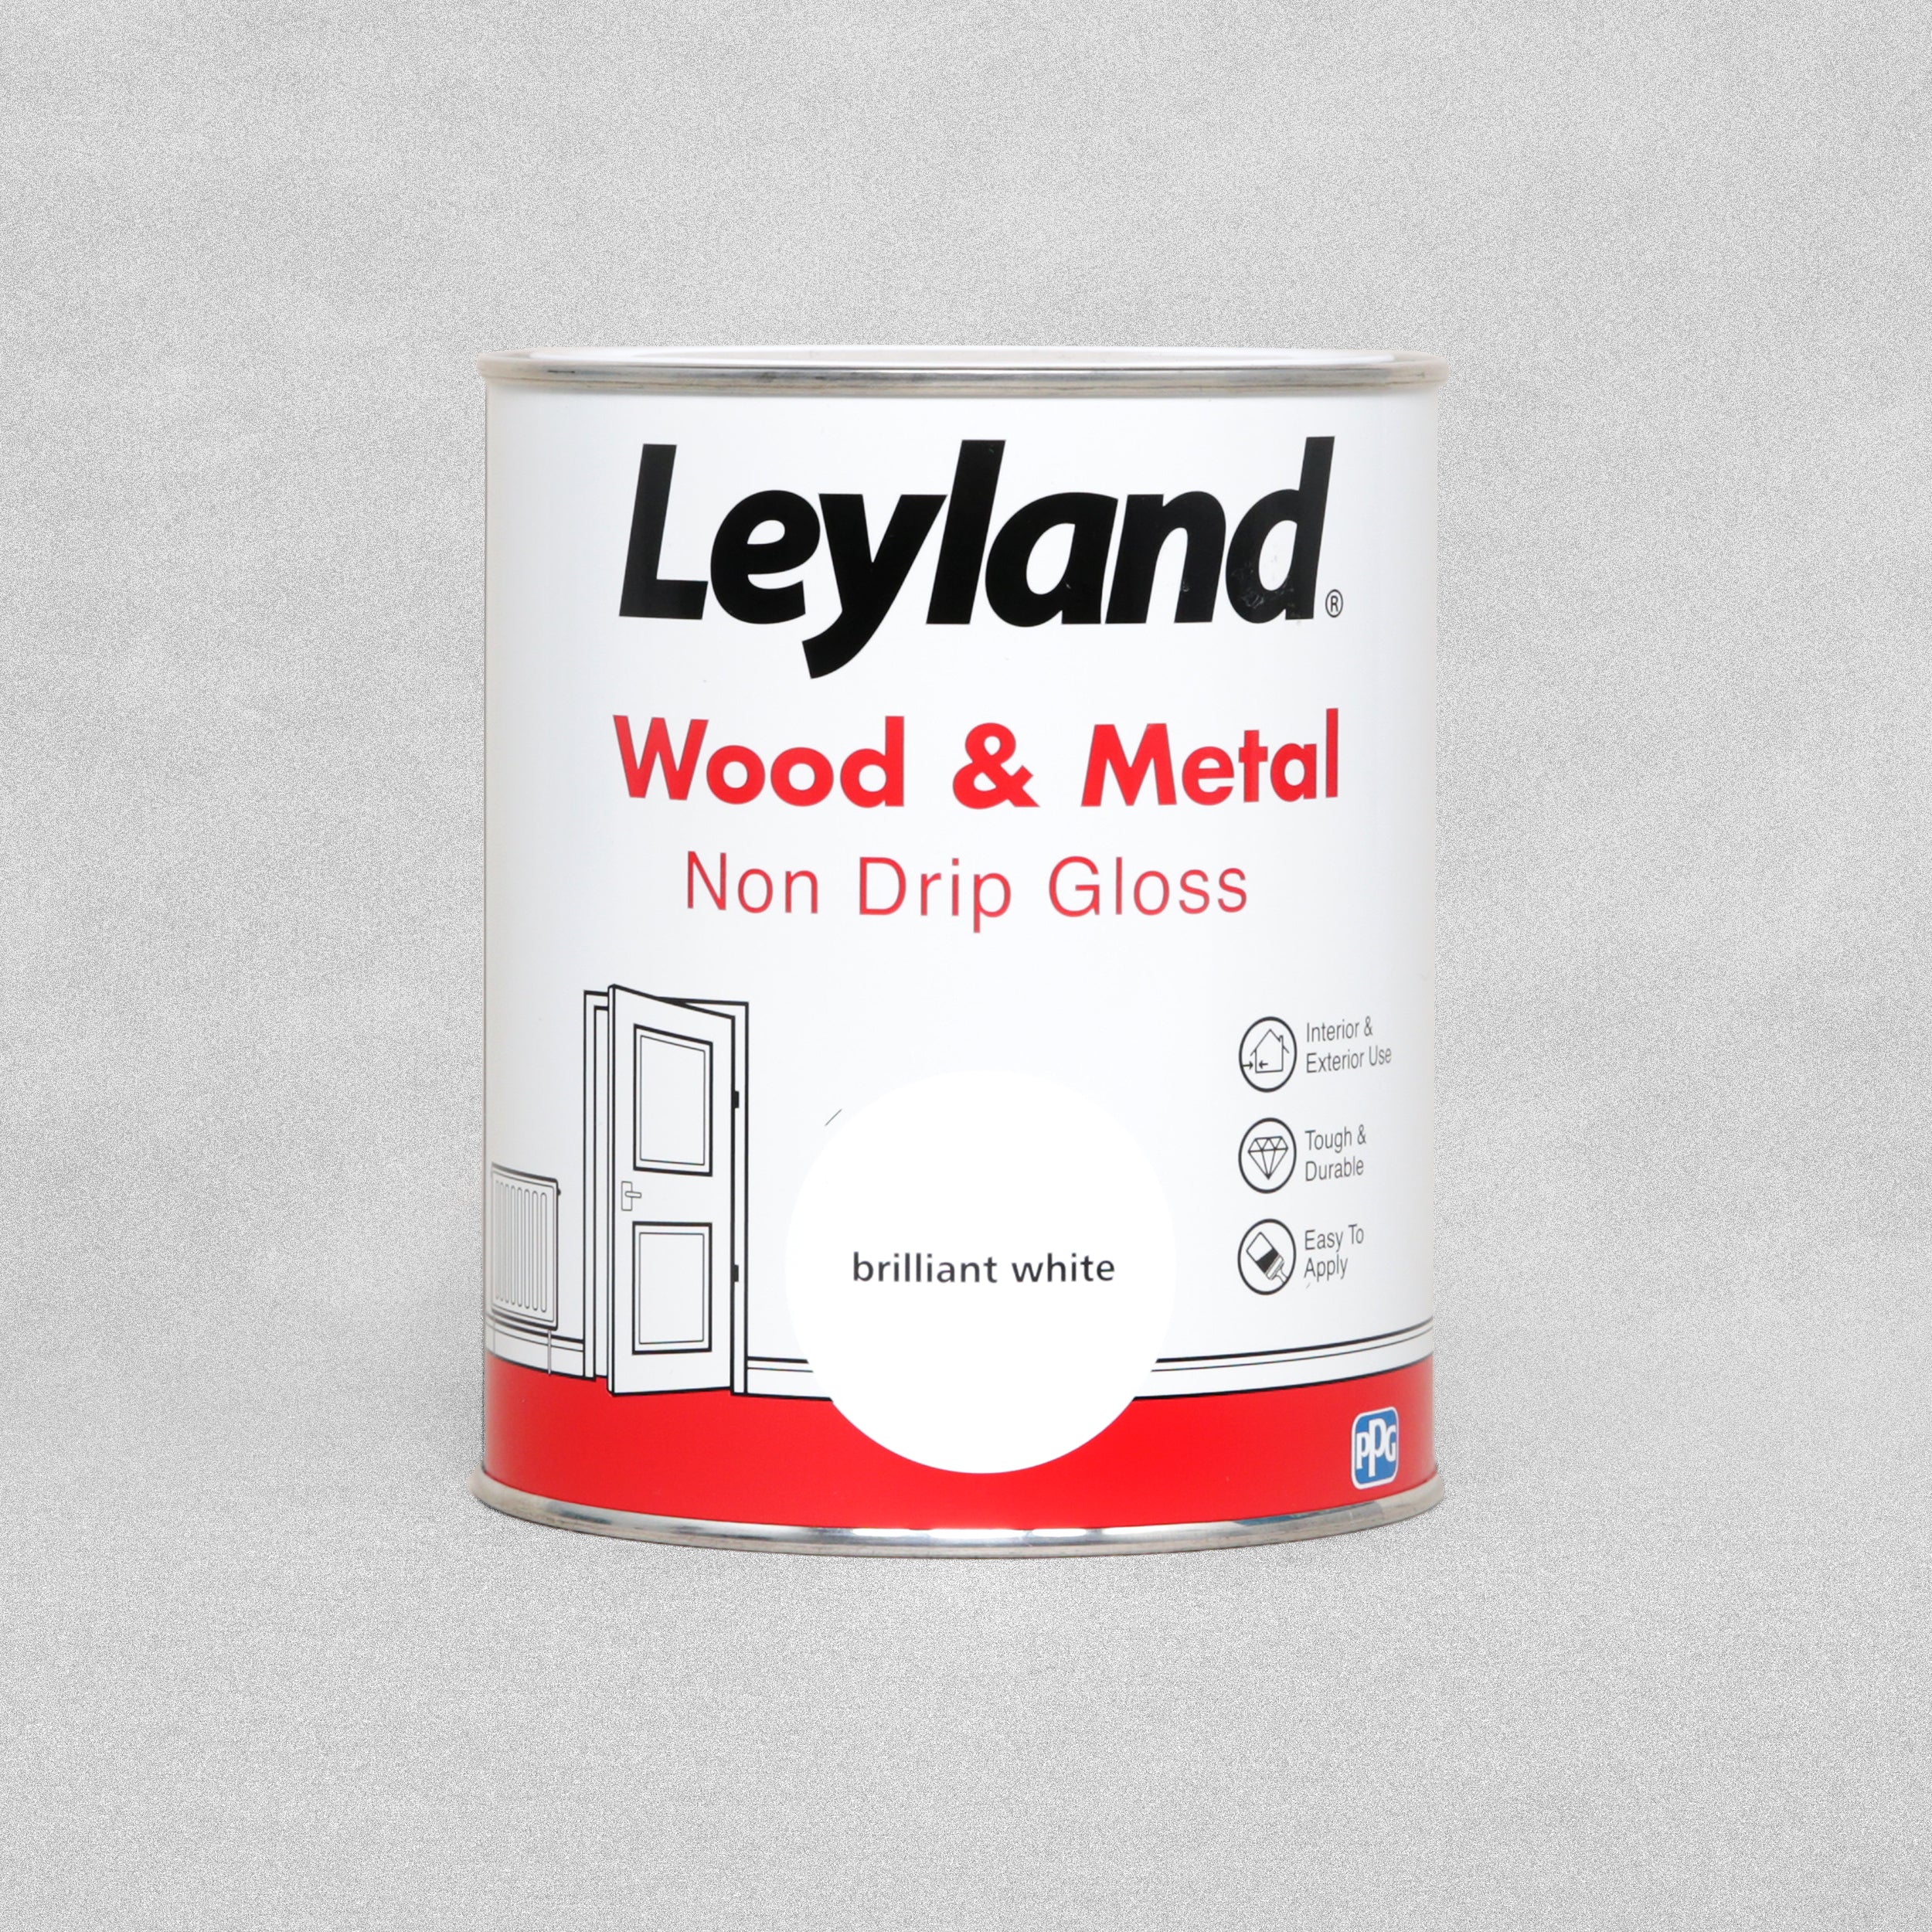 Leyland Wood and Metal Non Drip Gloss Paint 750ml - Brilliant White